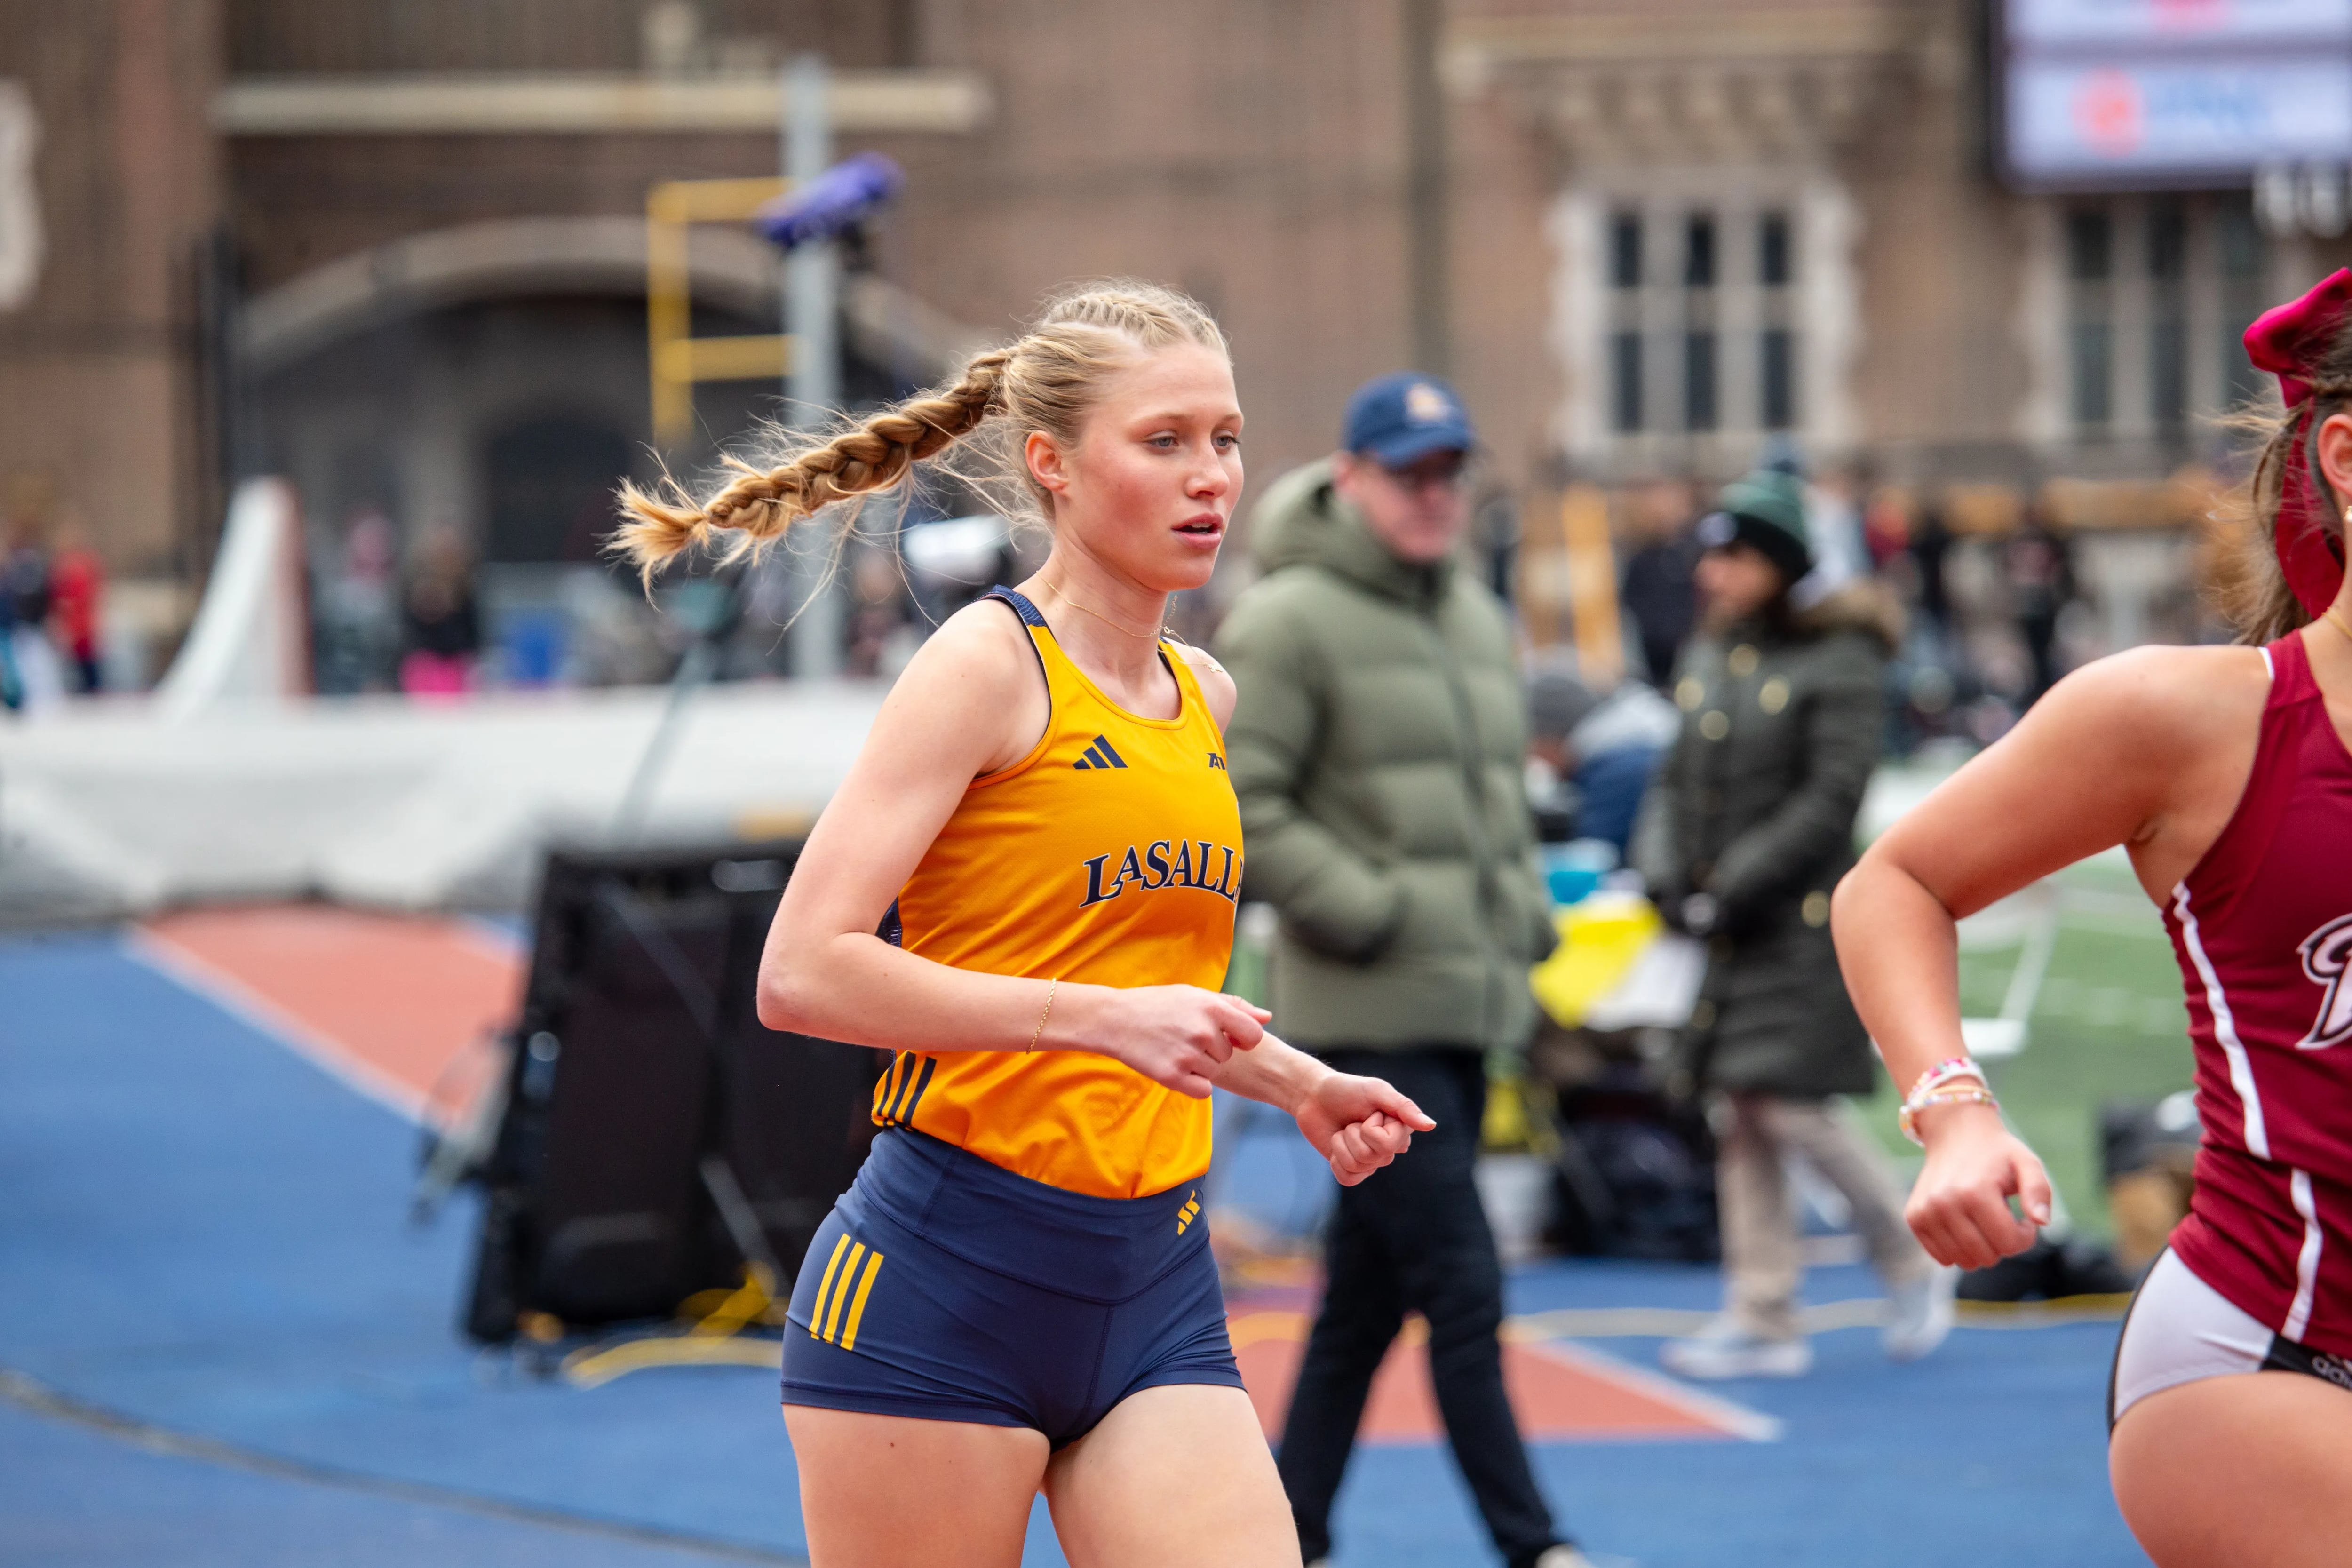 Cardinal O'Hara grad Christine Mancini is in line to represent La Salle at the Penn Relays.